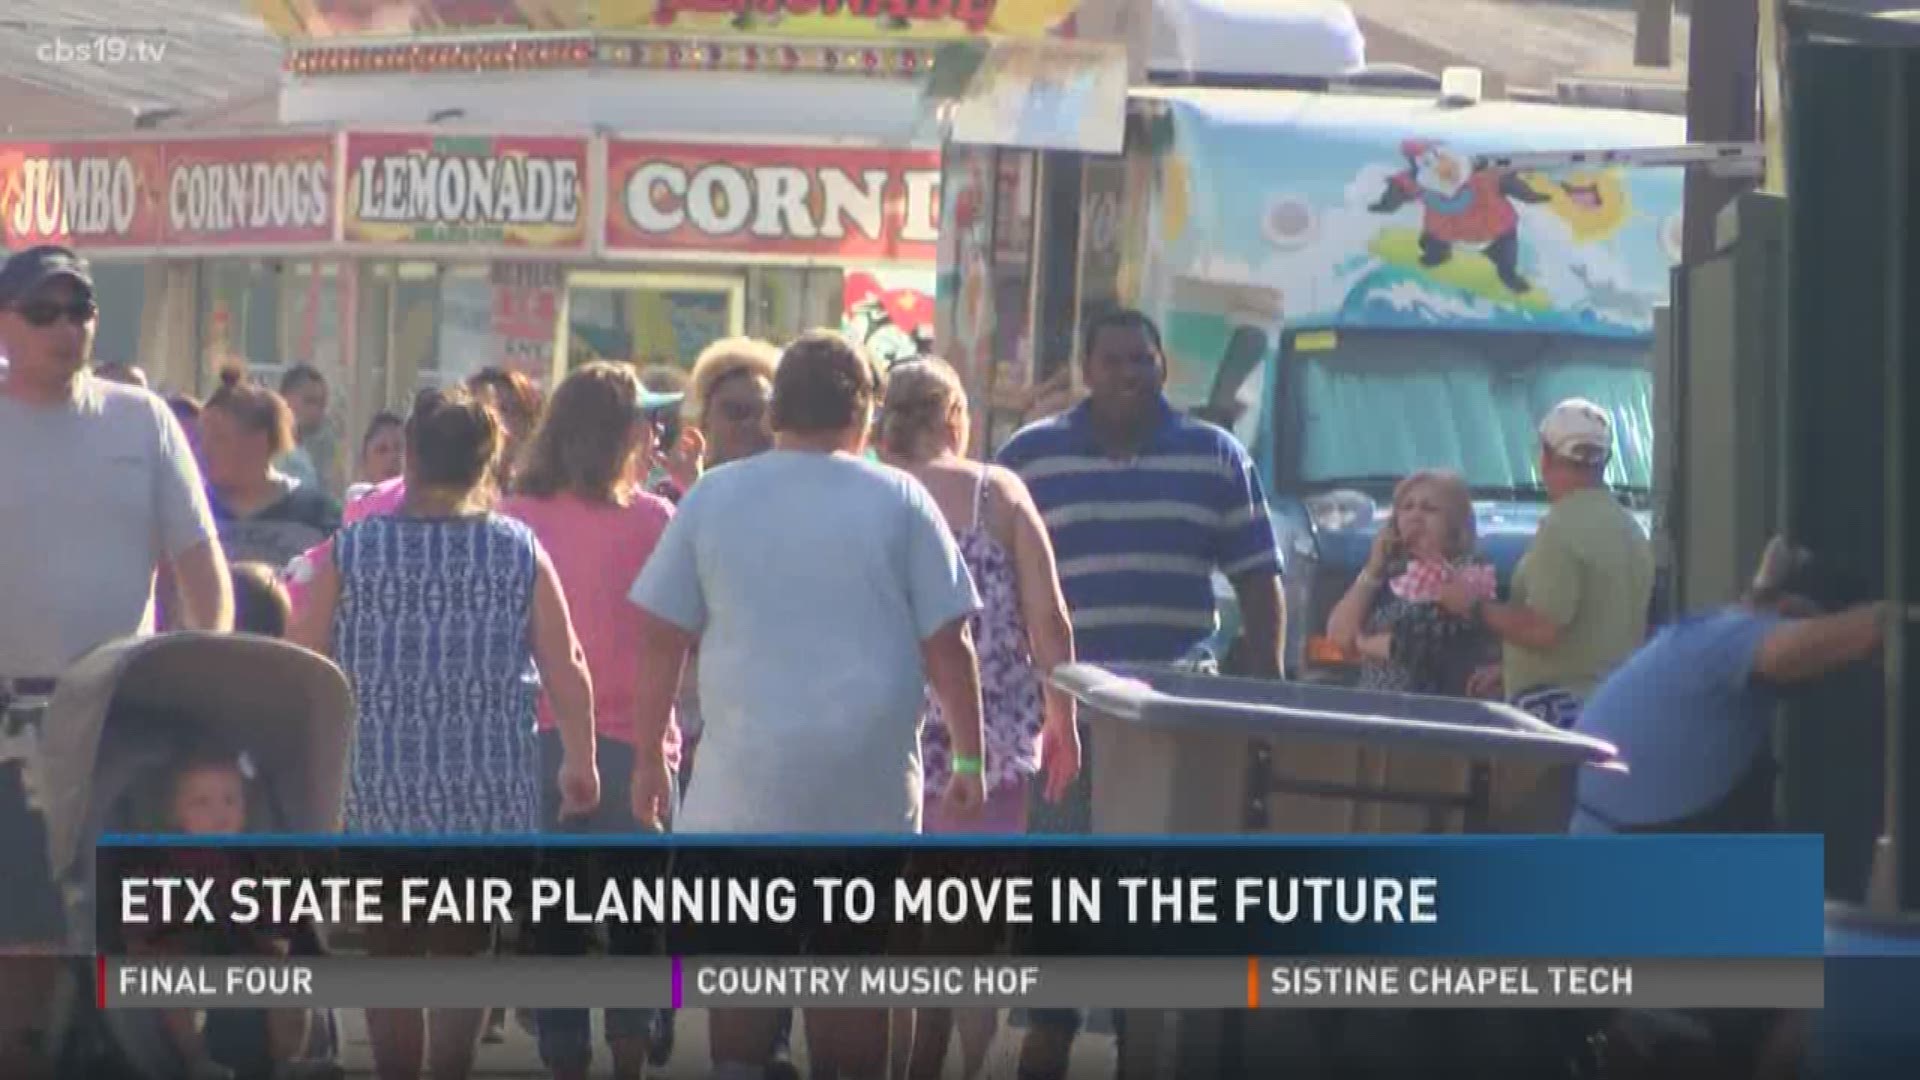 East Texas State Fair set to move